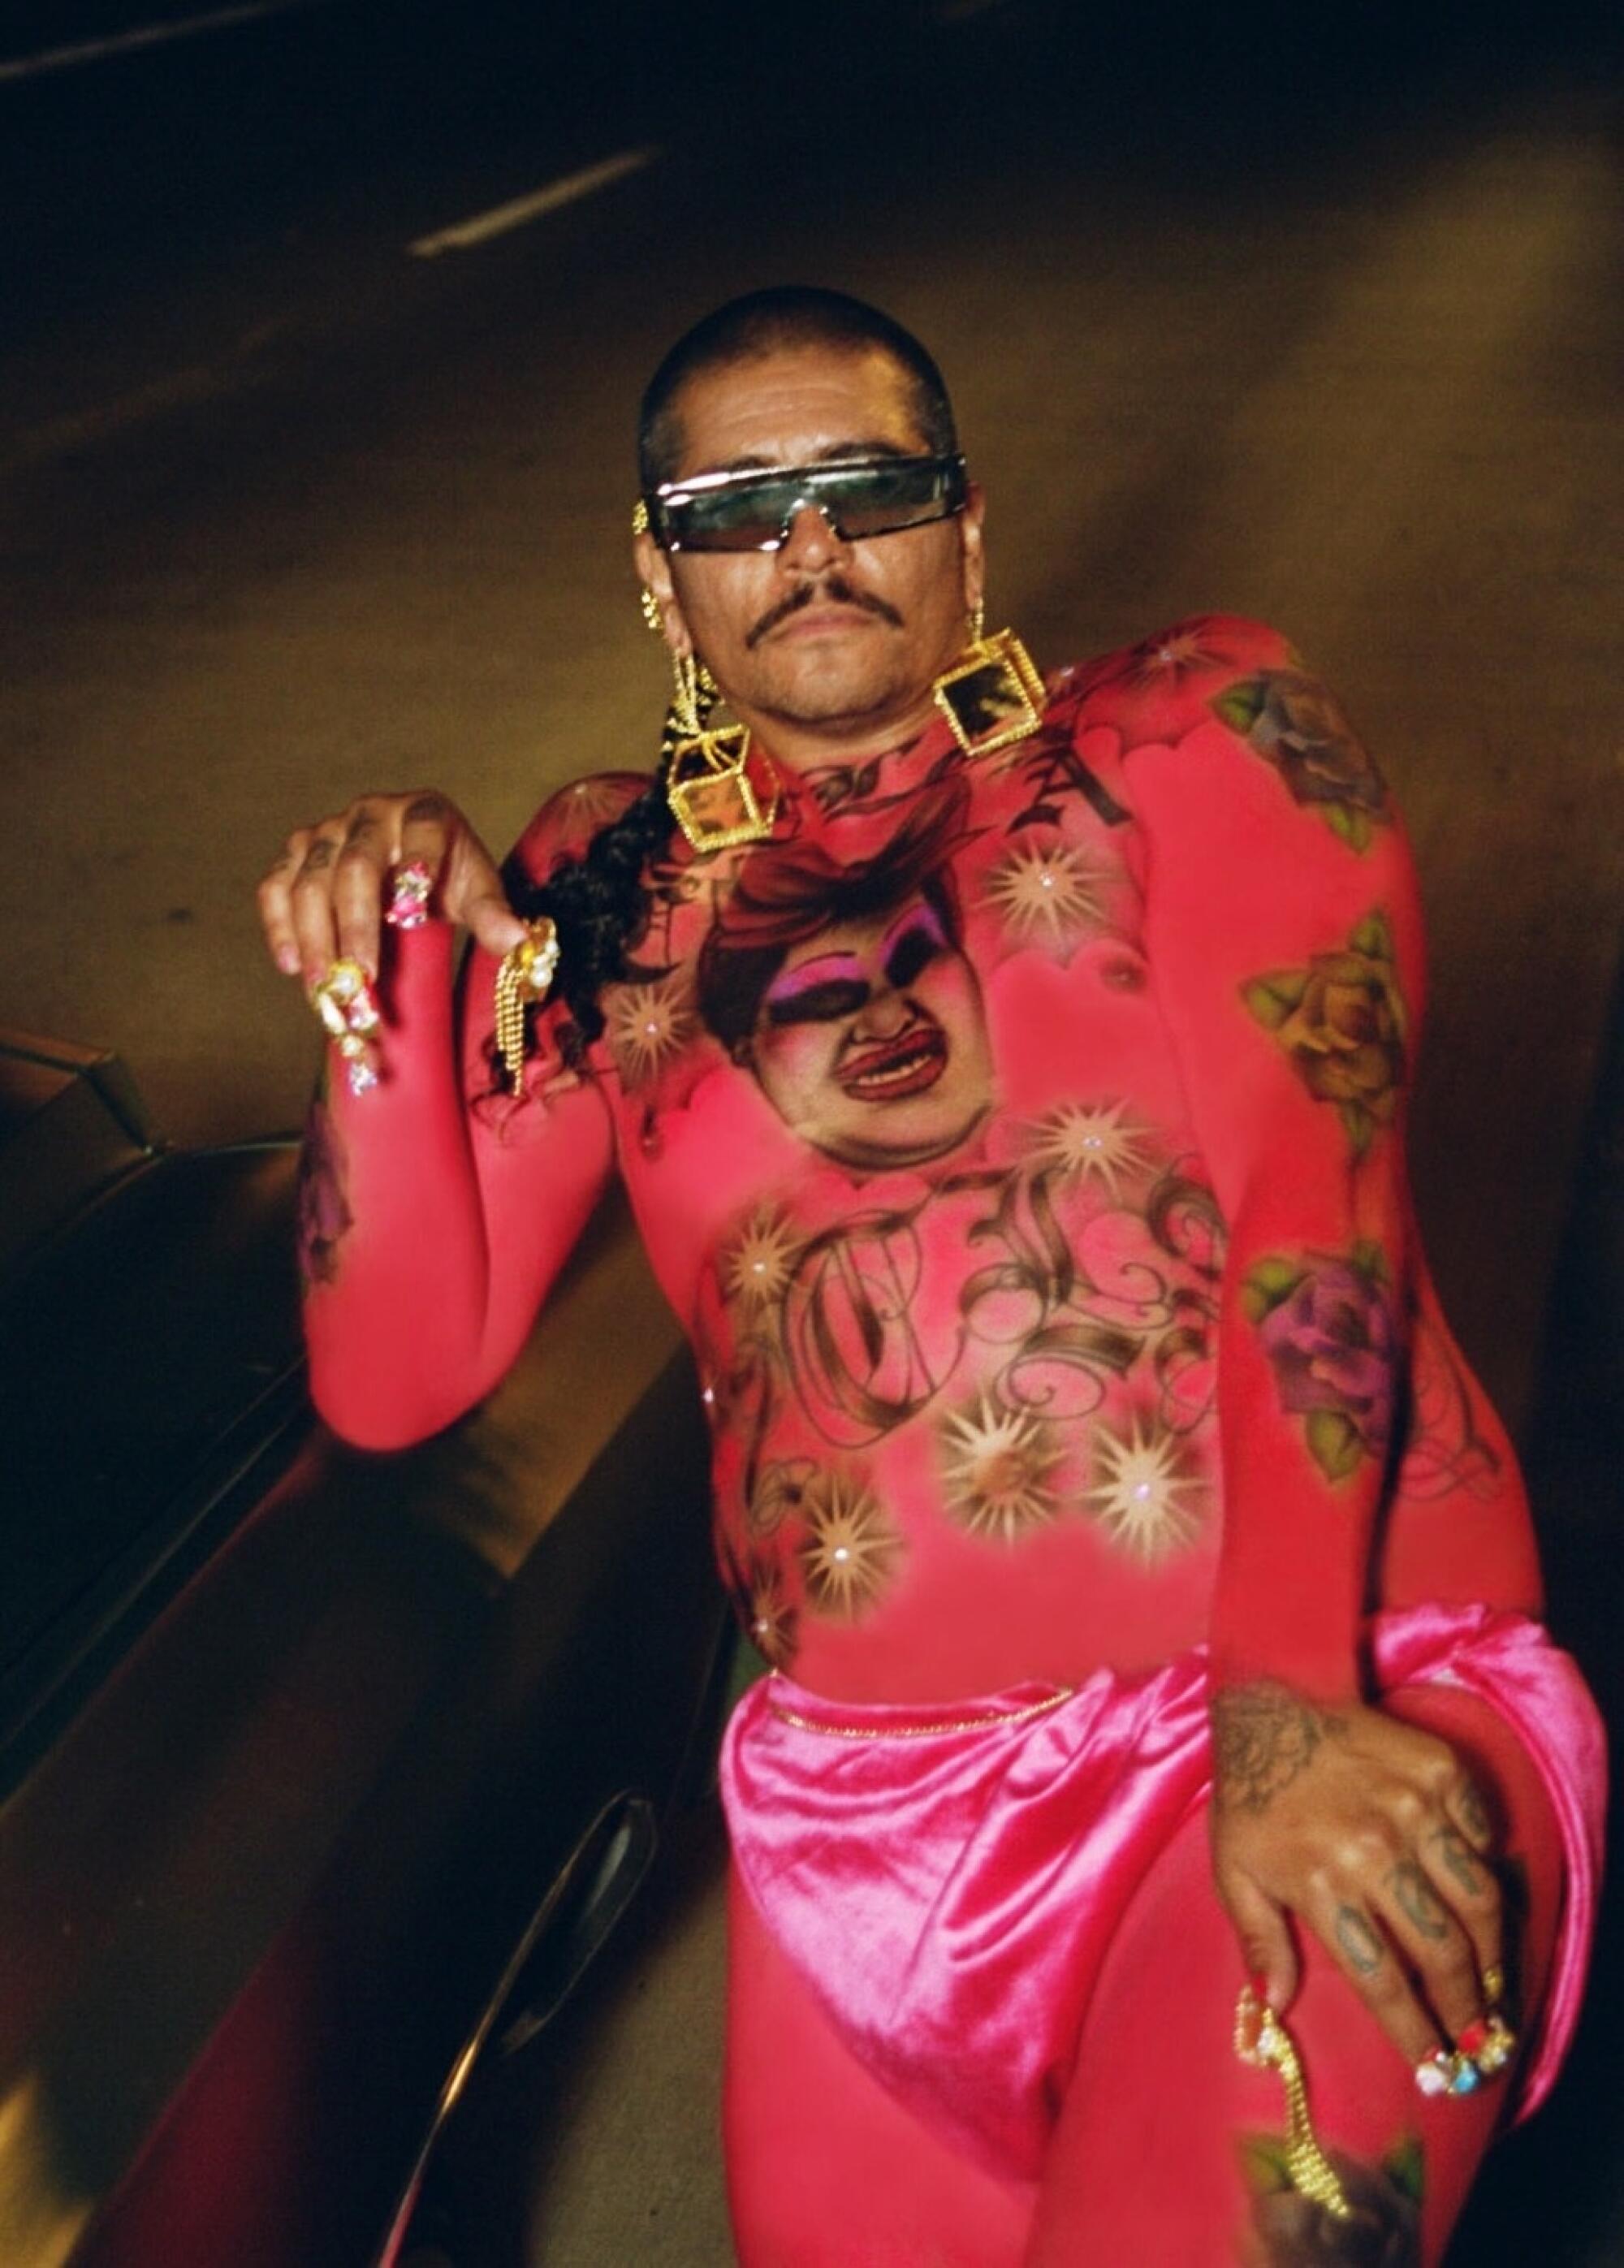 rafa esparza with a painted pink body in the style of a lowrider car